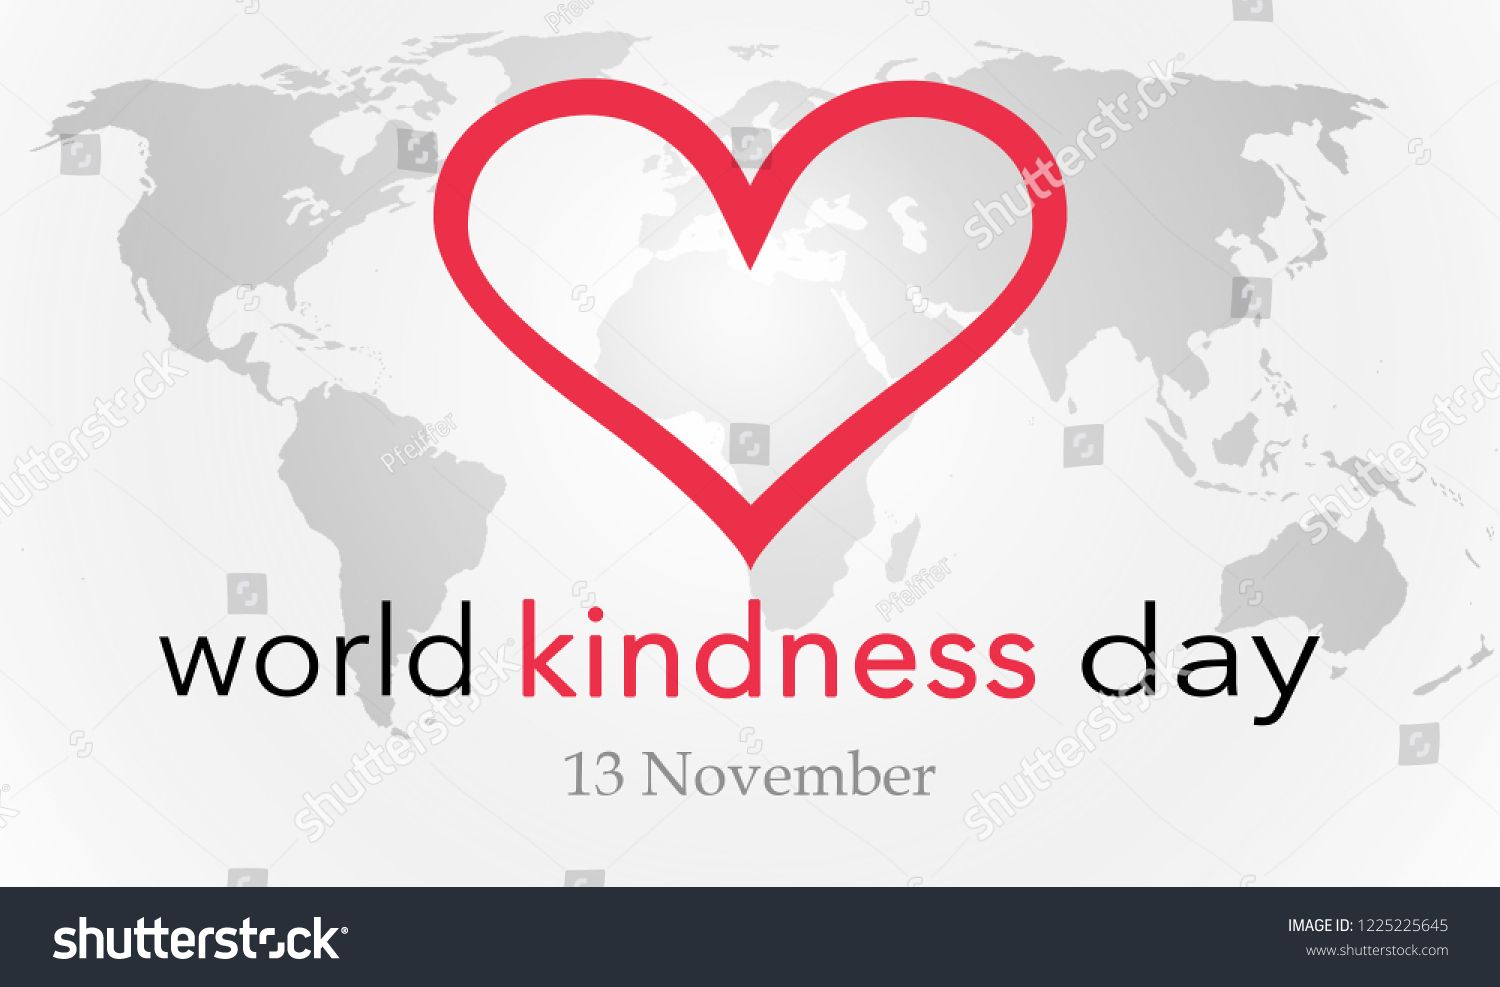 World Kindness Day Background With Heart And Map